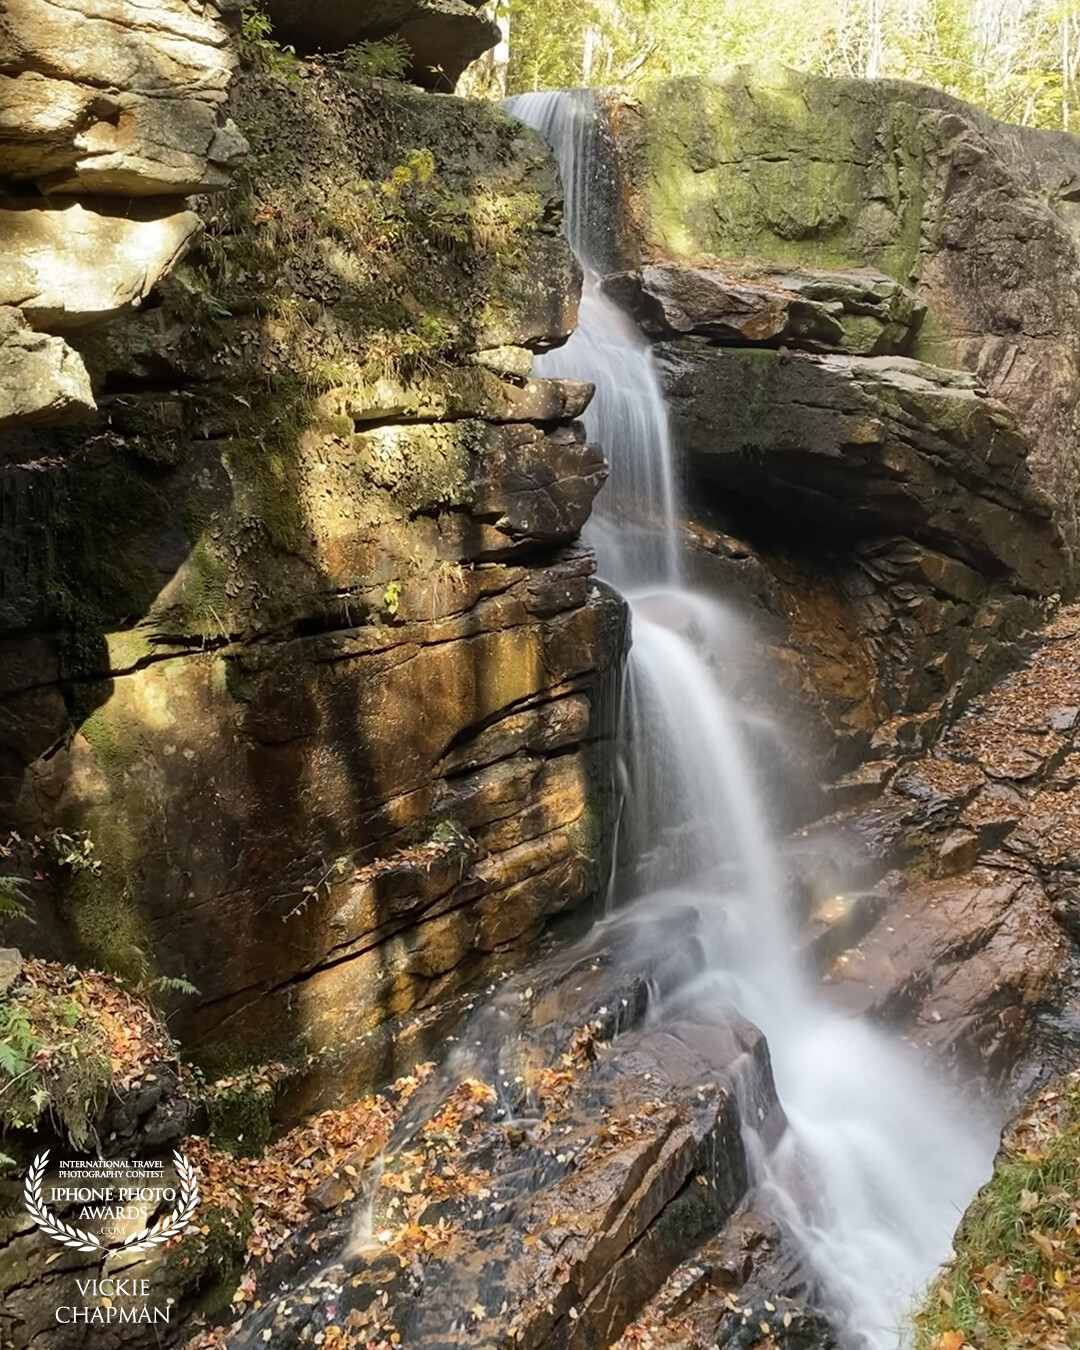 This is one of the beautiful waterfalls in Franconia Notch State Park, Maine, USA. I couldn’t resist a beautiful long exposure shot to give it a dreamy look.